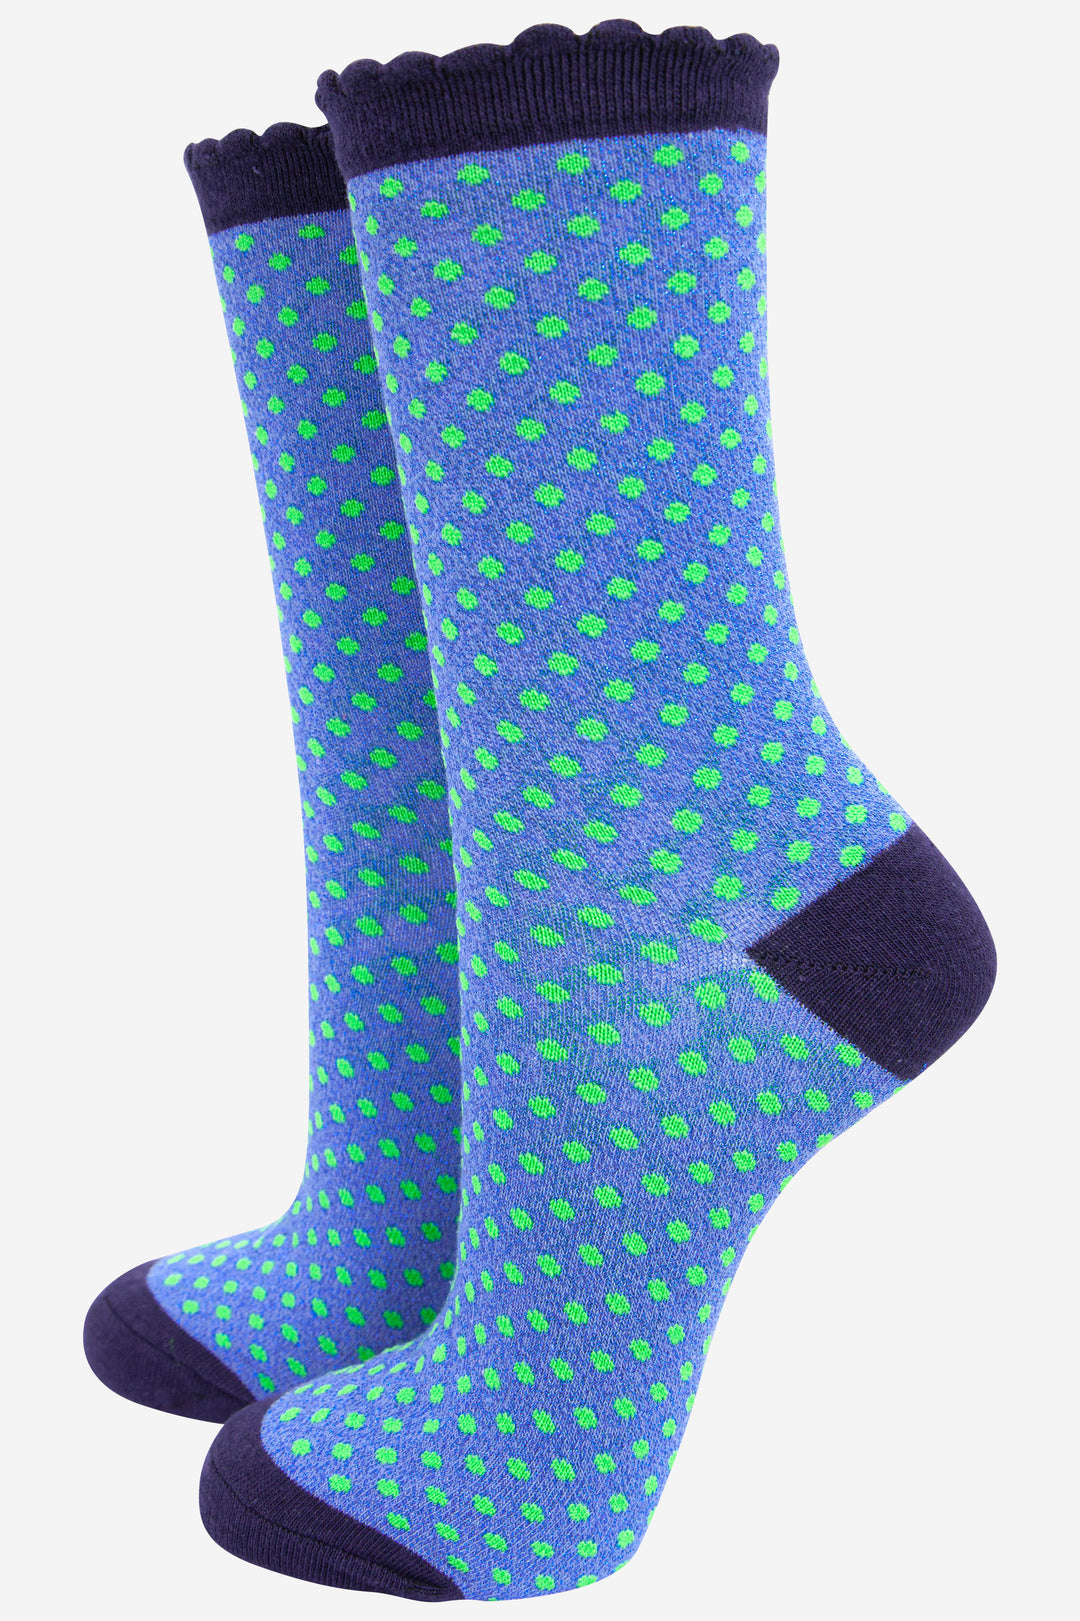 blue glitter ankle socks with mini green polka dot spots and a navy blue scalloped top